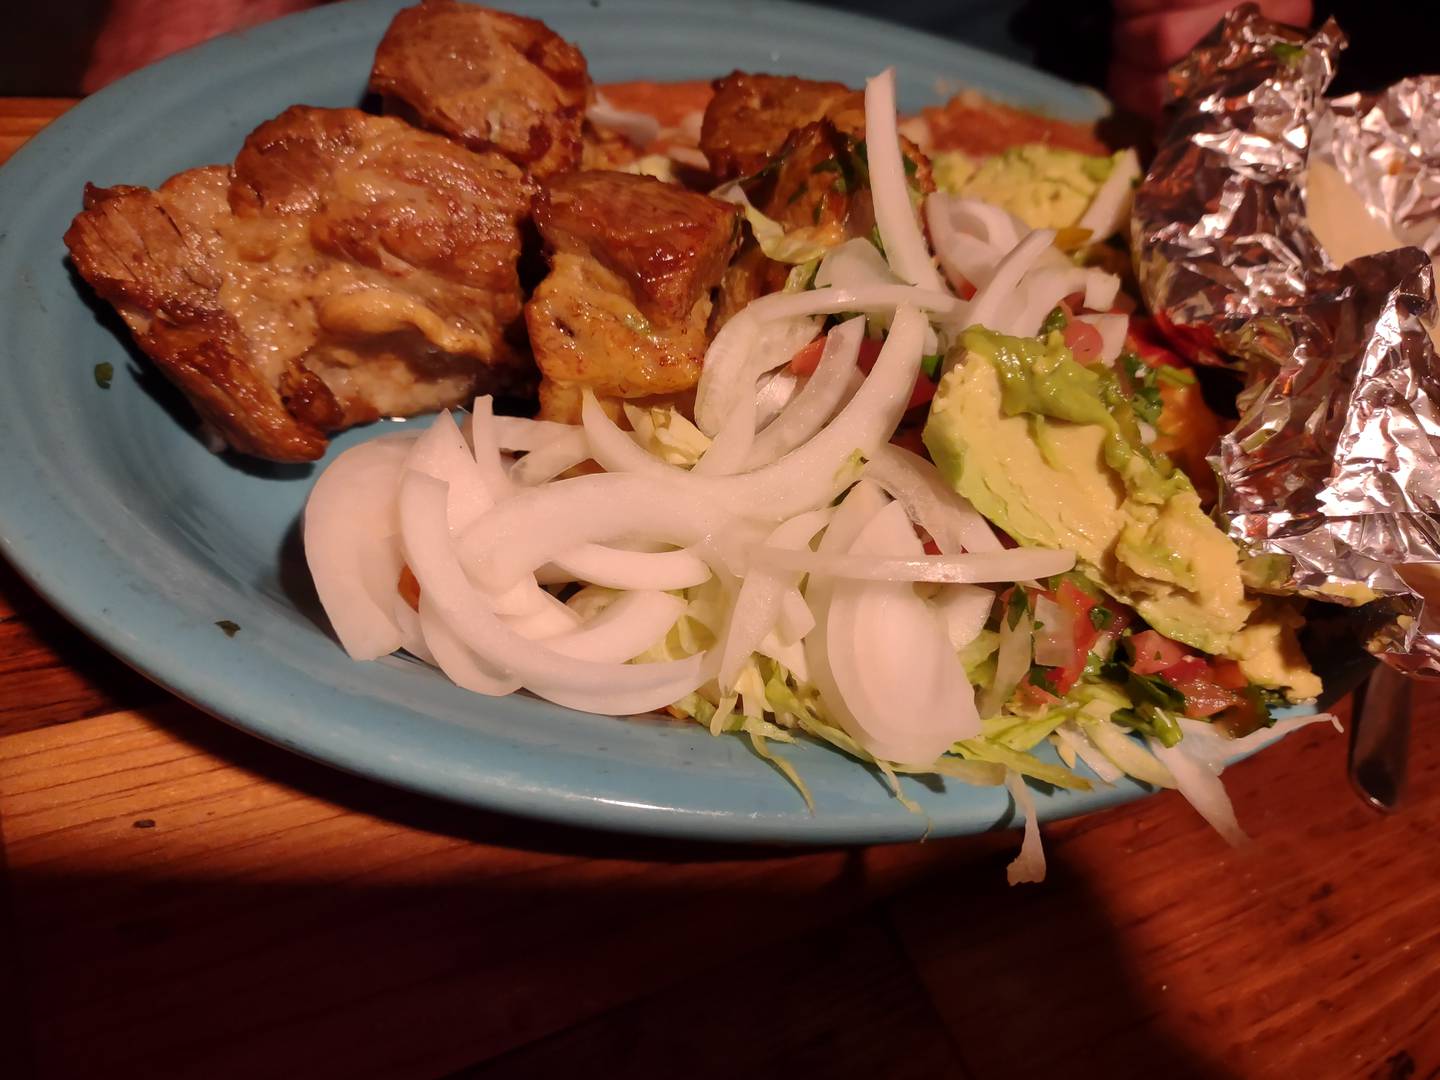 The carnitas at La Fondita Mexican Grill in Ottawa are pork tenderloins simmered in beer with jalapenos and avocado slices, and plenty of onions. The meal is served with rice, beans and a tossed salad.